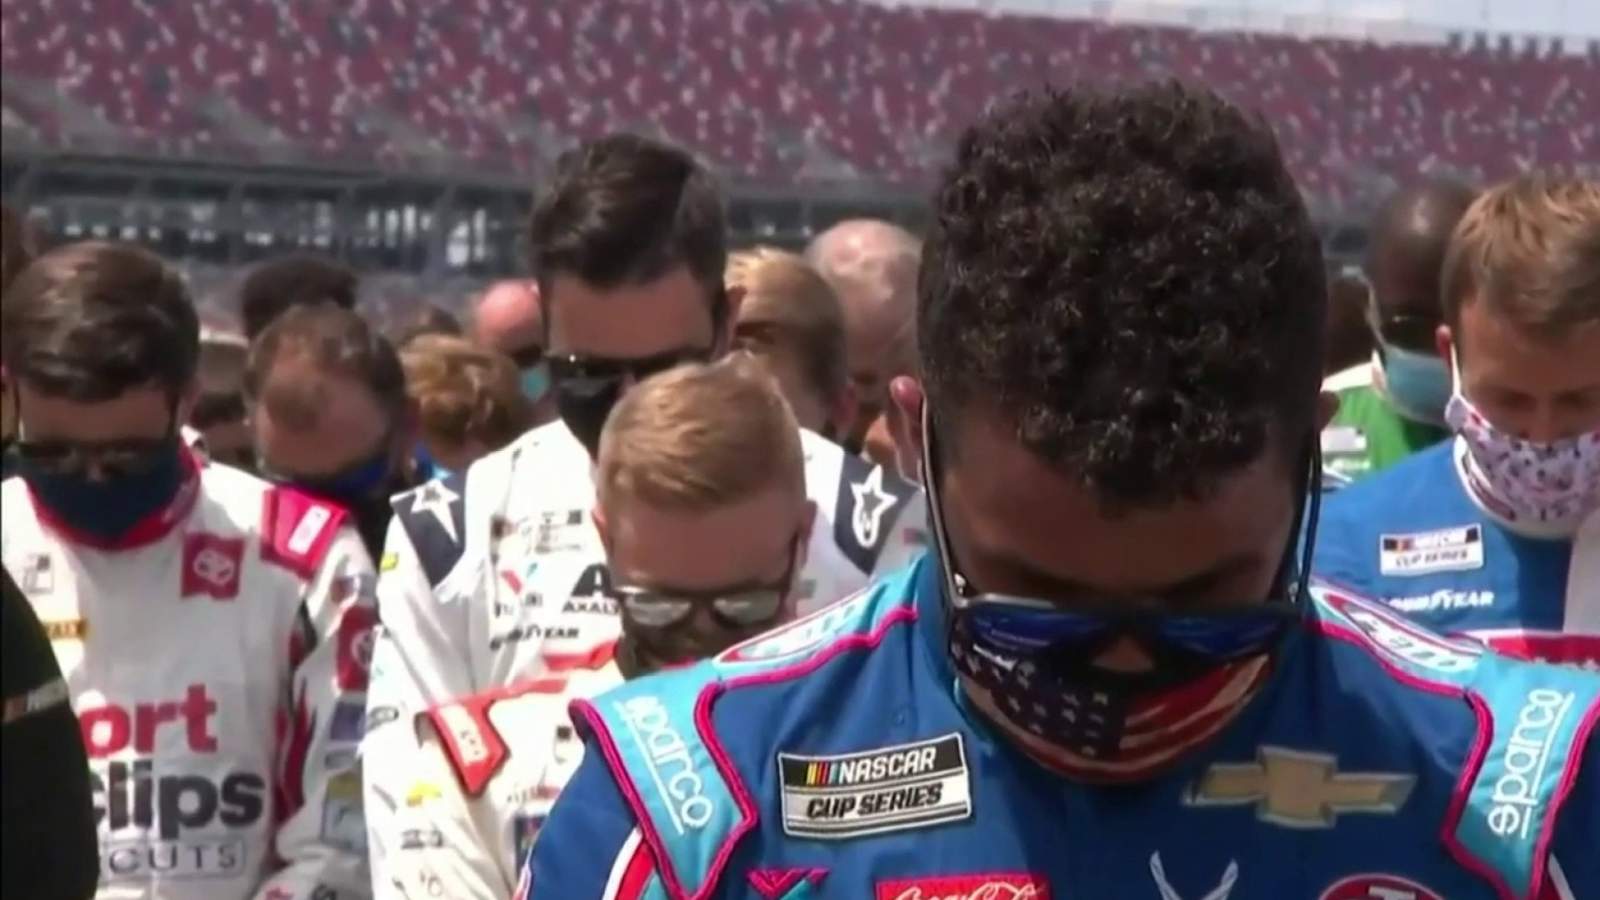 Benched: Racing driver Bubba Wallace talks media attention amid NASCAR flag controversy